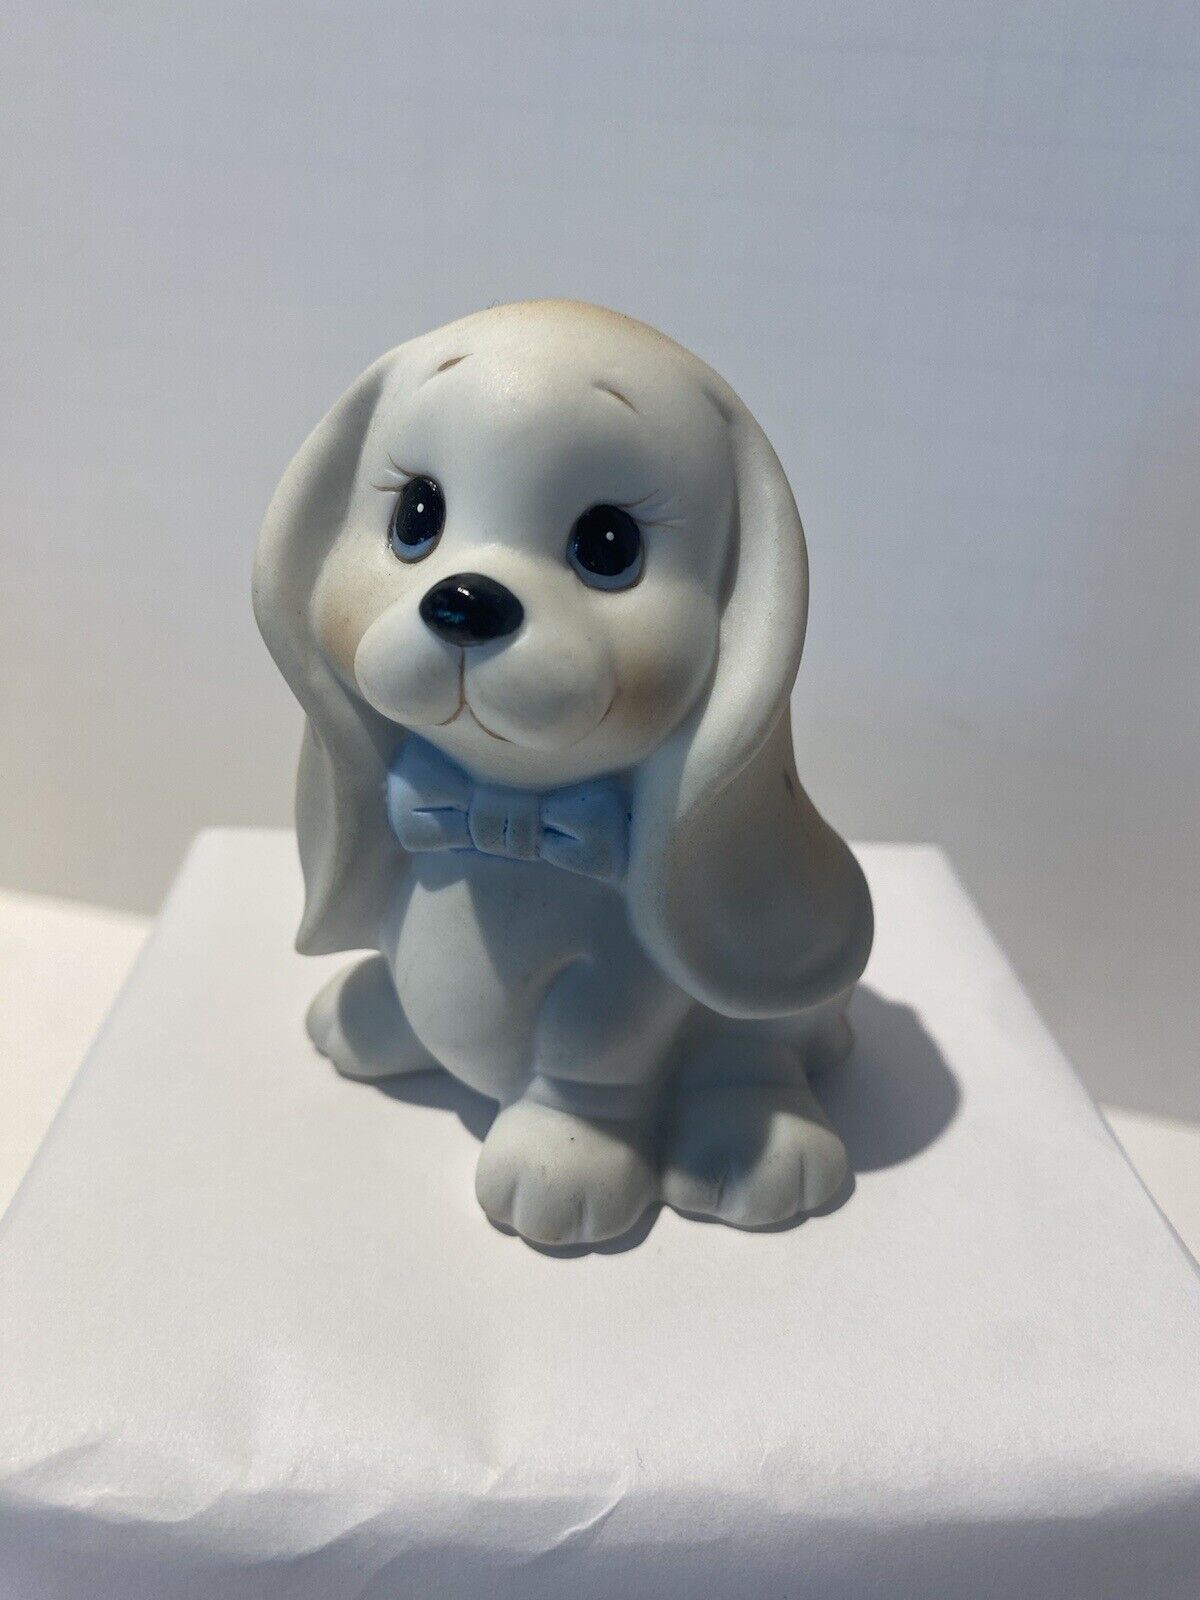 Vintage SIMSON Gift Ware Porcelain Puppy With Blue Bow Tie